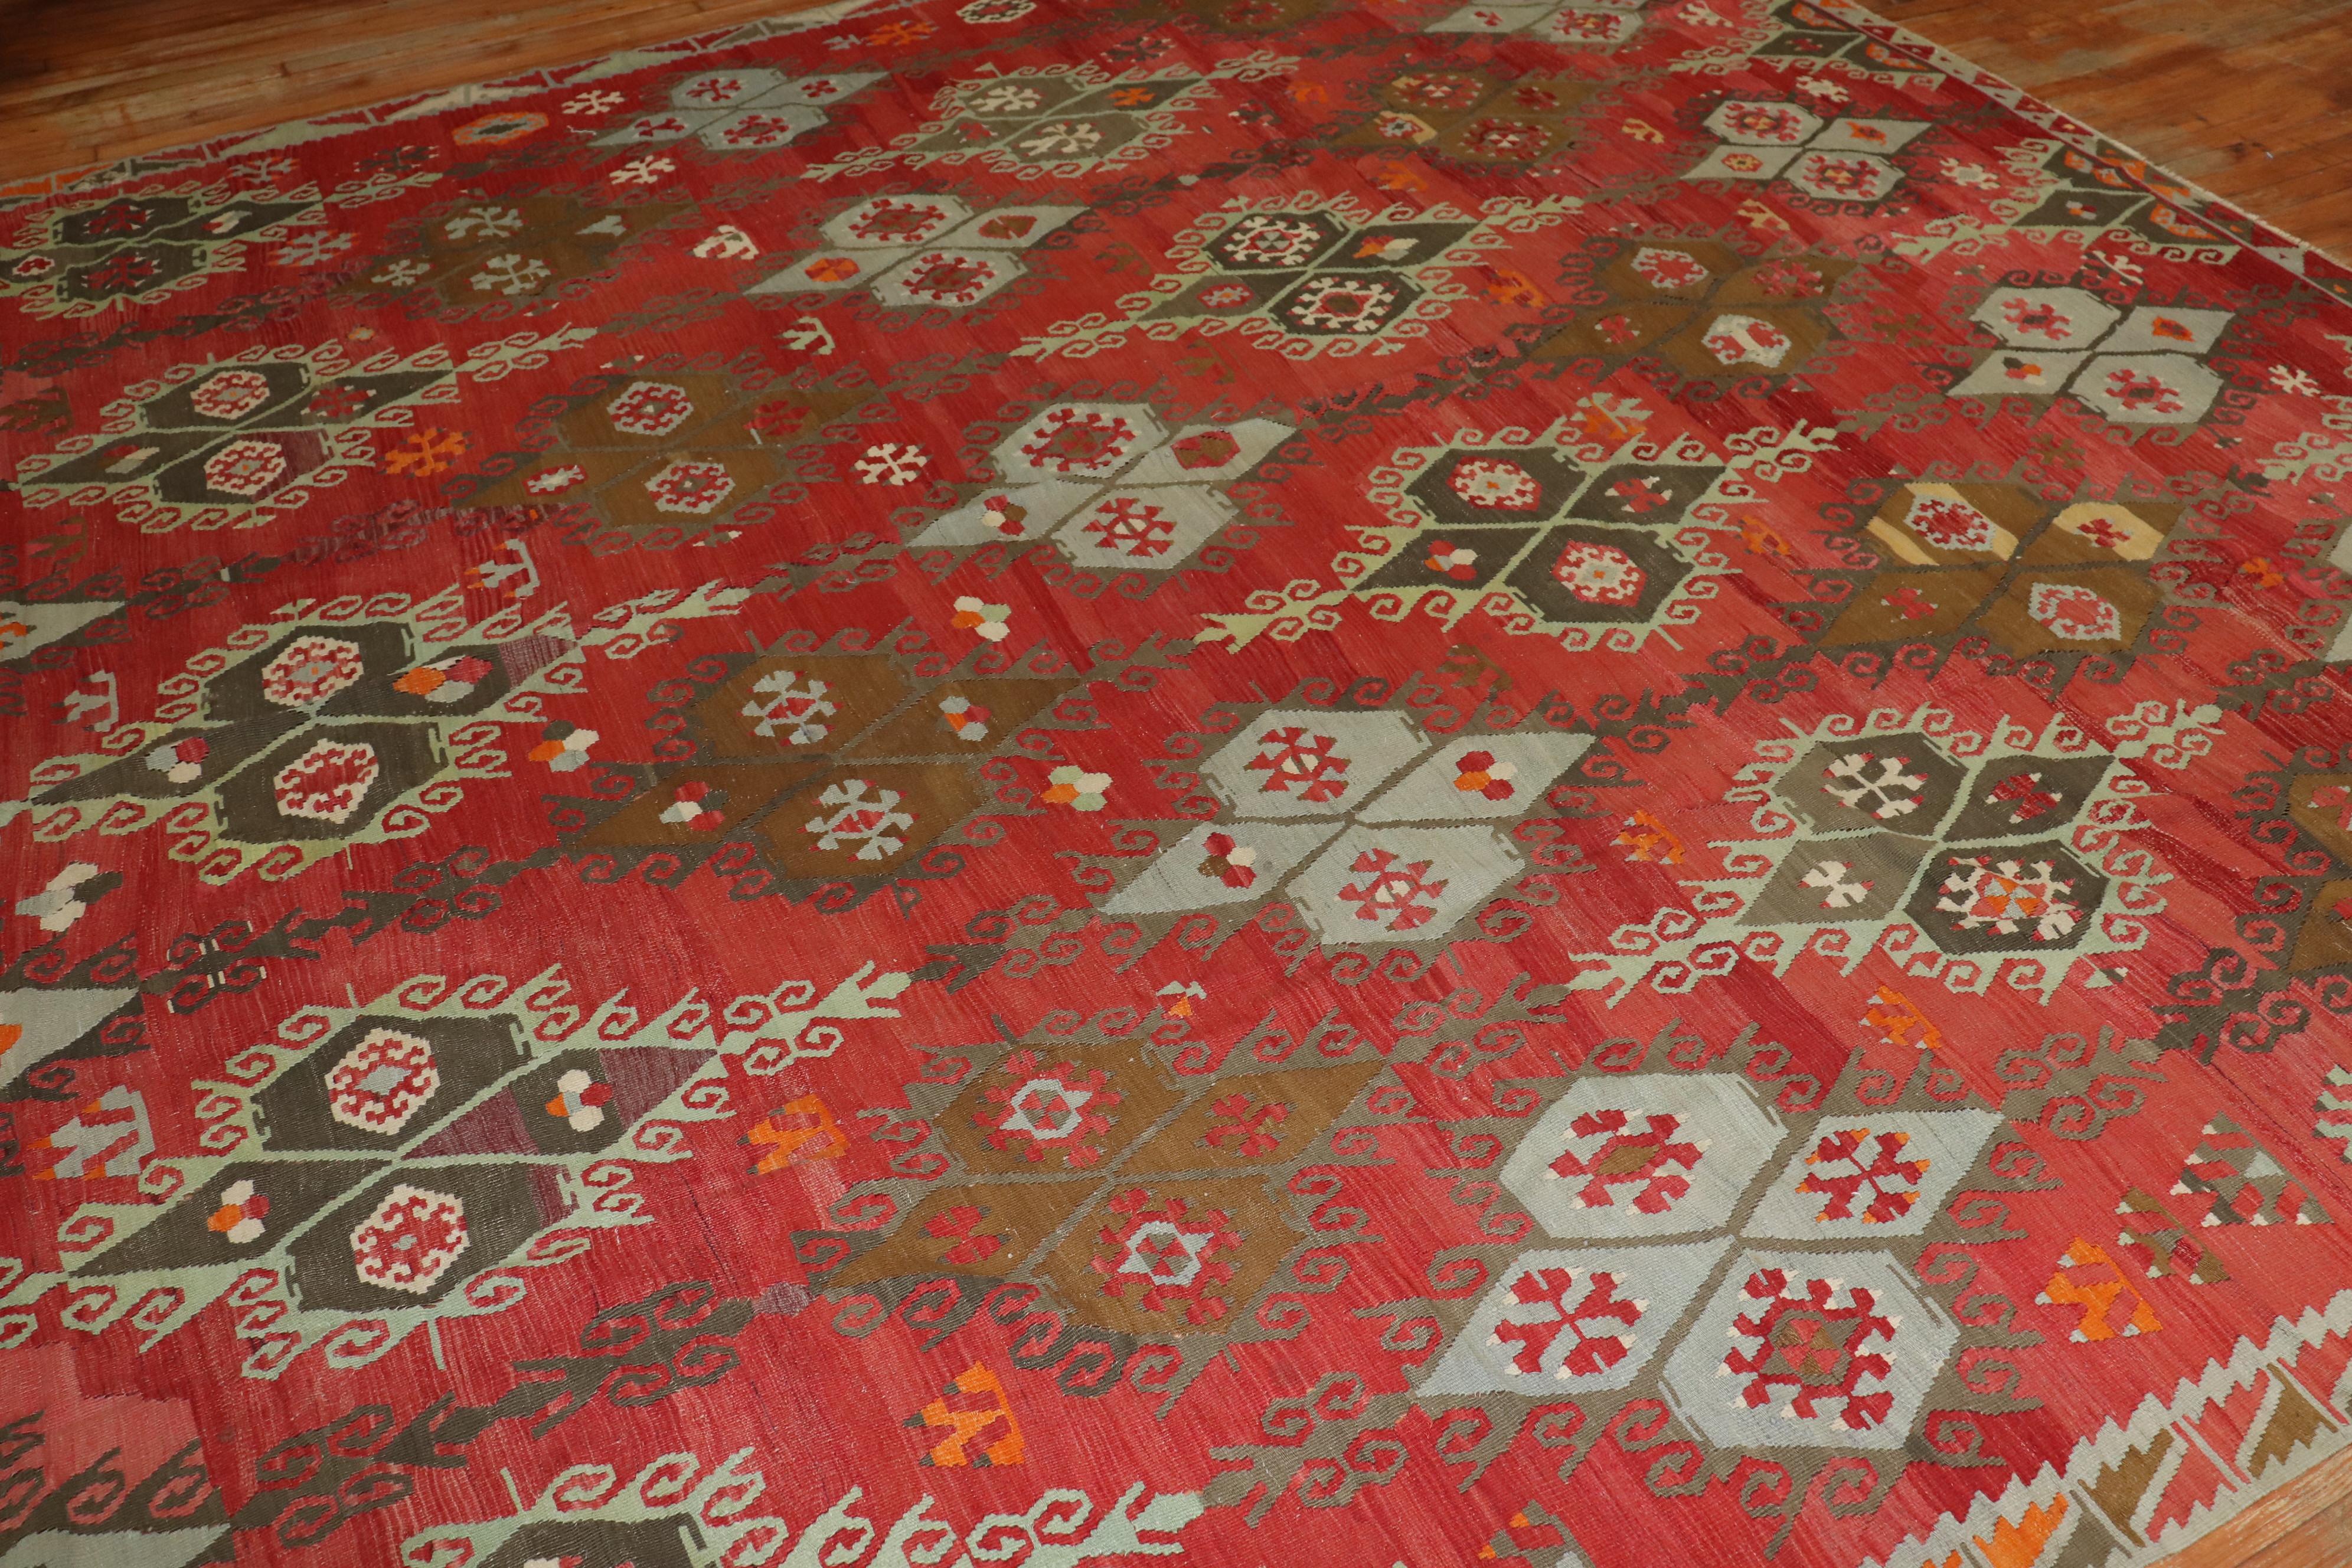 Large Scale Masculine Antique Turkish Kilim Room Size Rug, Early 20th Century 5